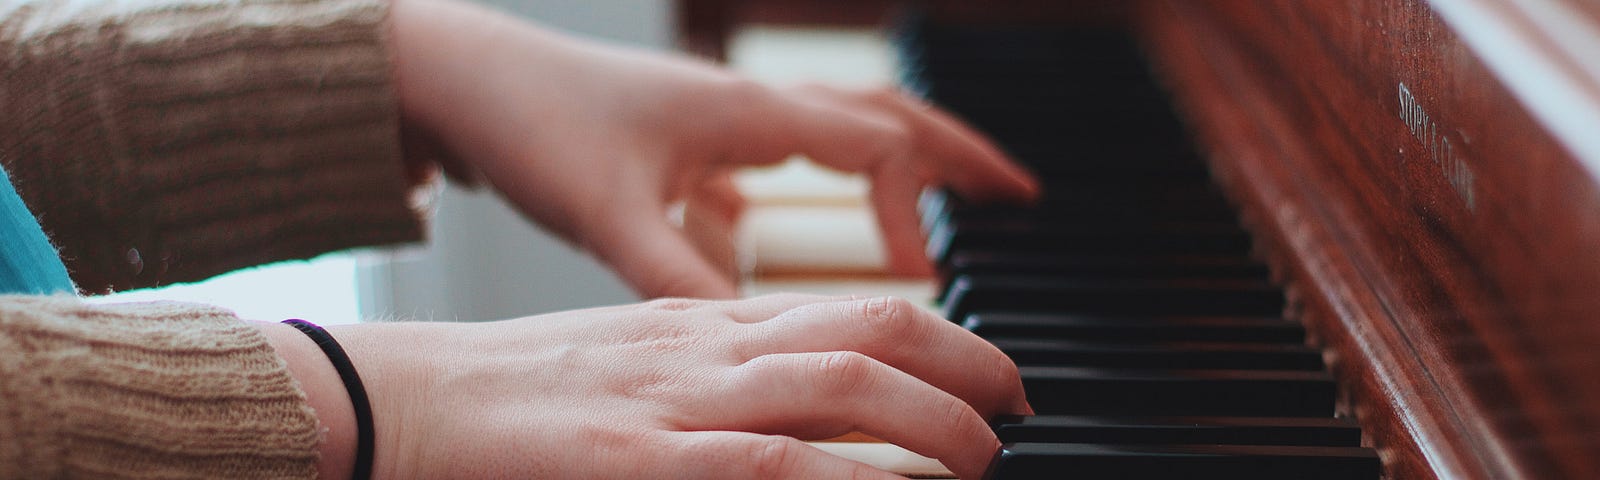 Hands playing on a piano keyboard